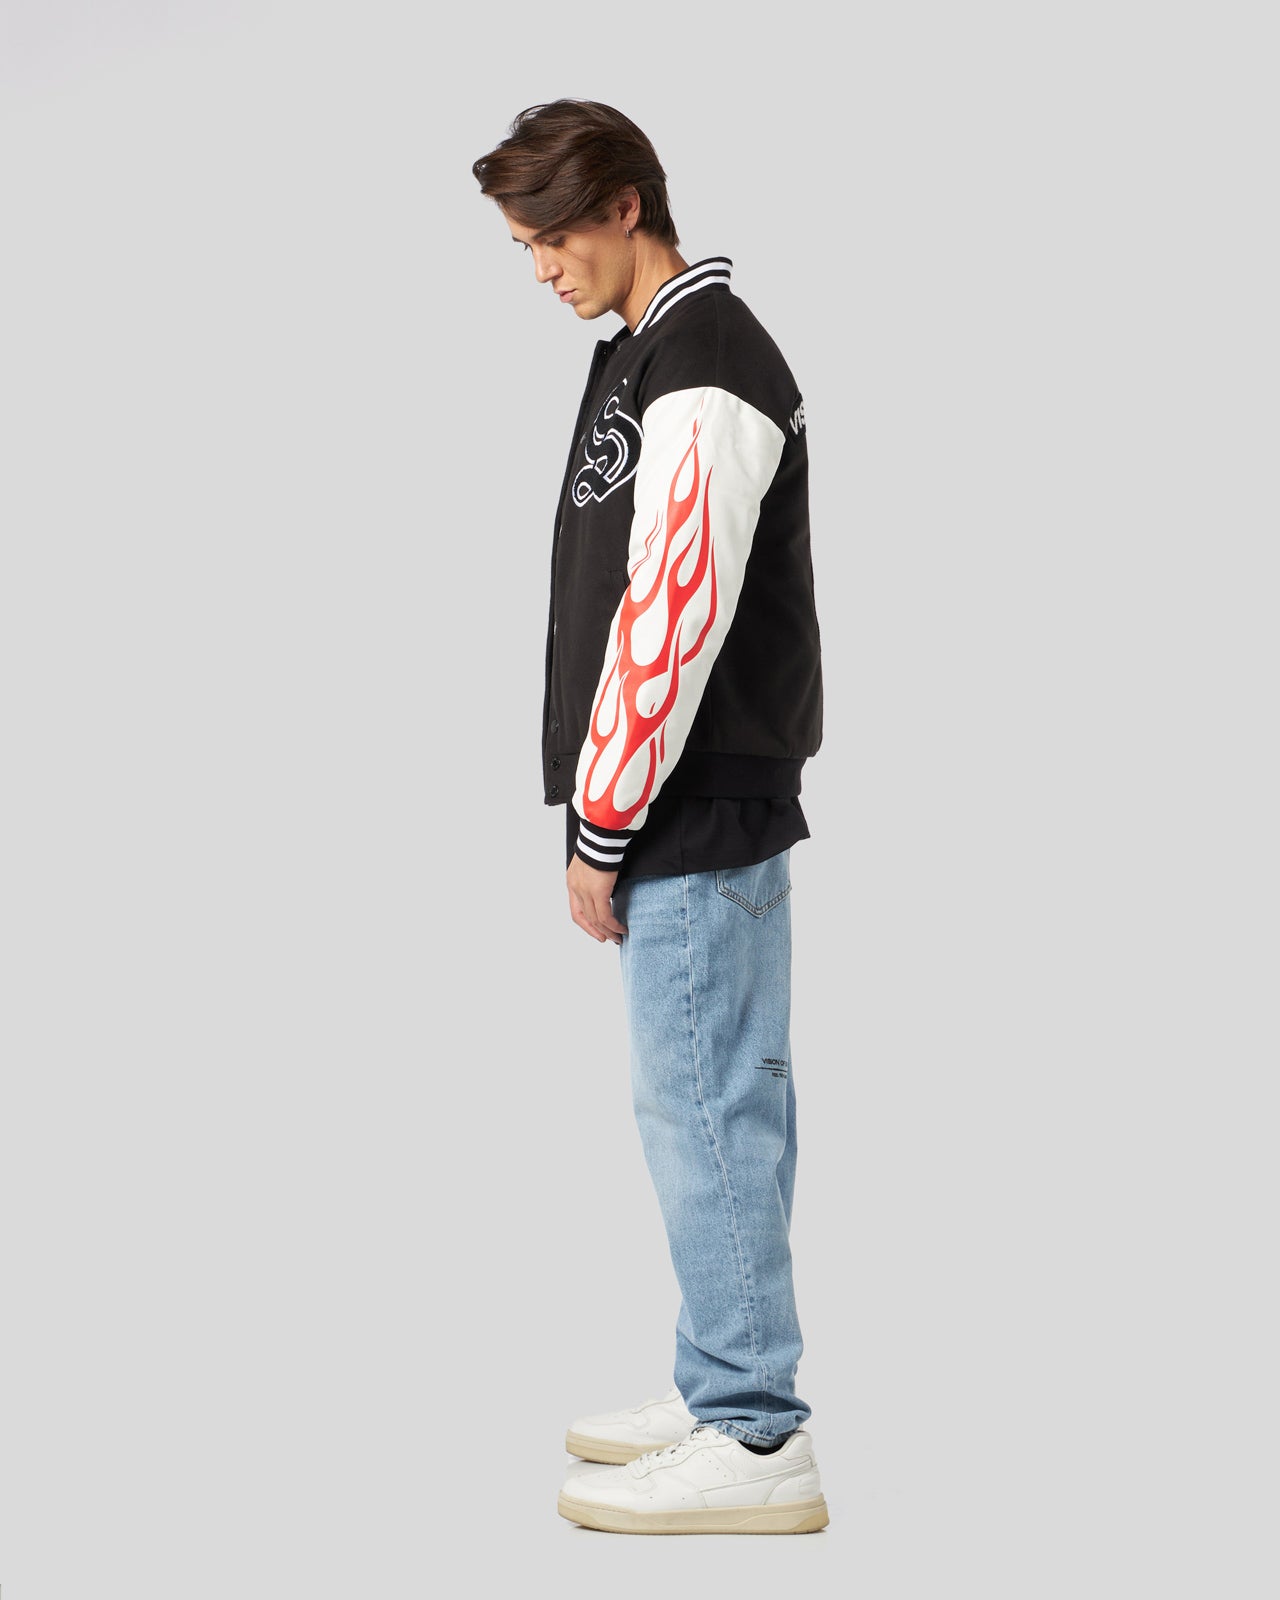 VARSITY JACKET WITH GOTIC PATCH RED FLAMES AND LOGO